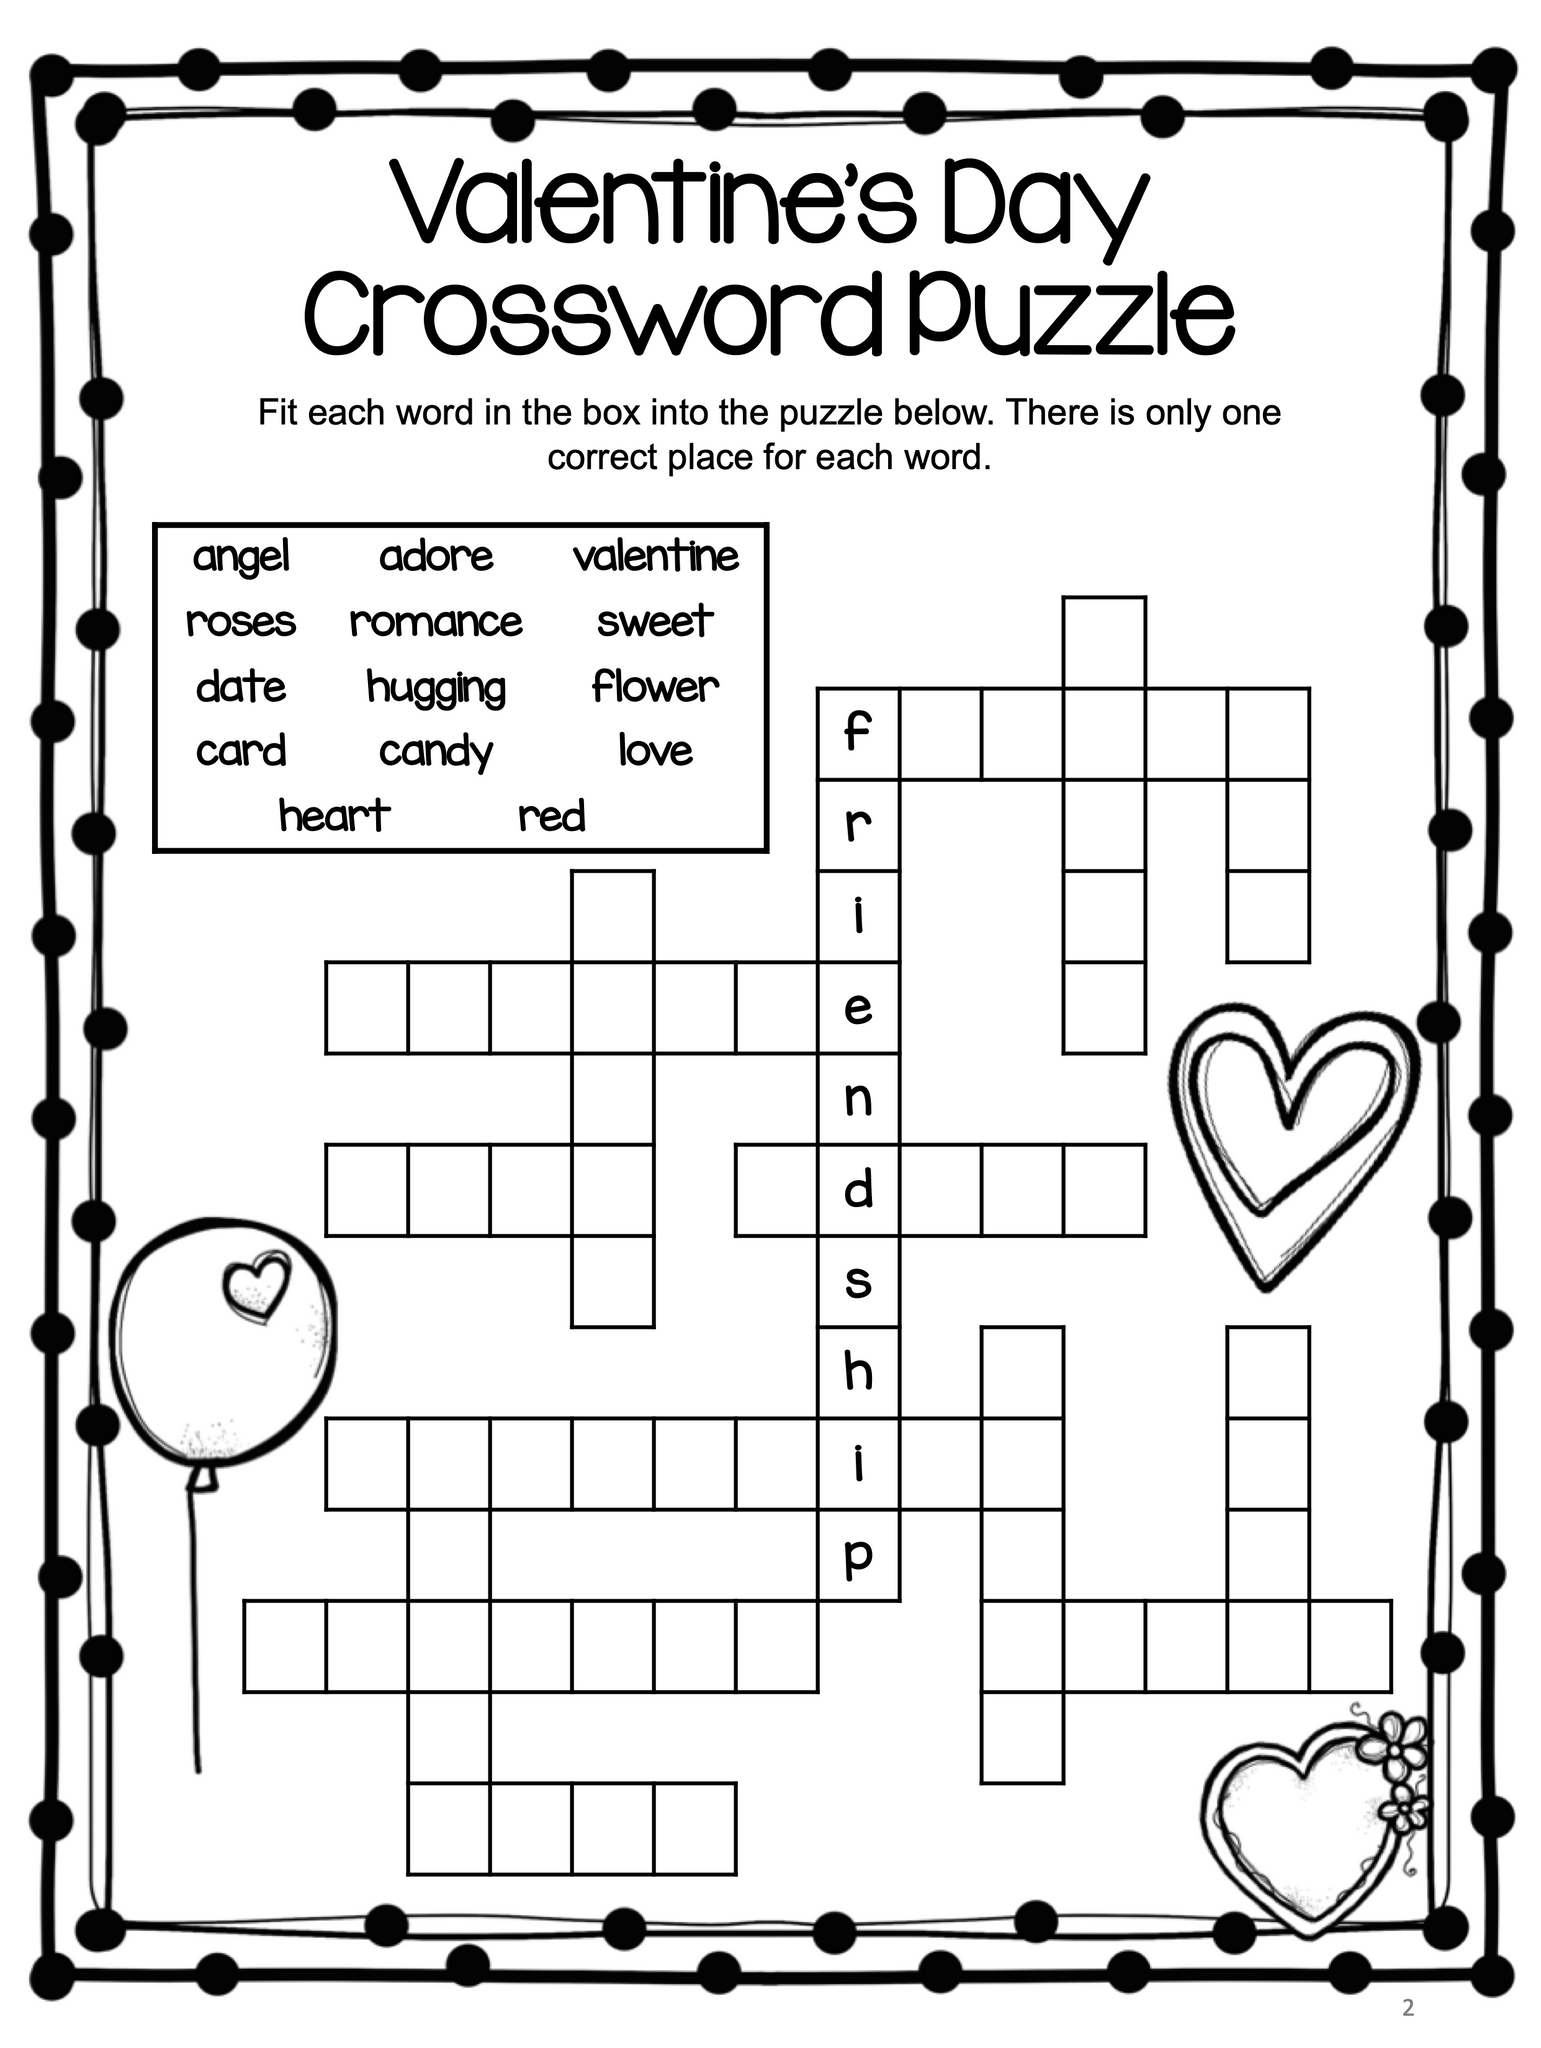 word-scramble-puzzles-to-print-for-kids-101-activity-vegetables